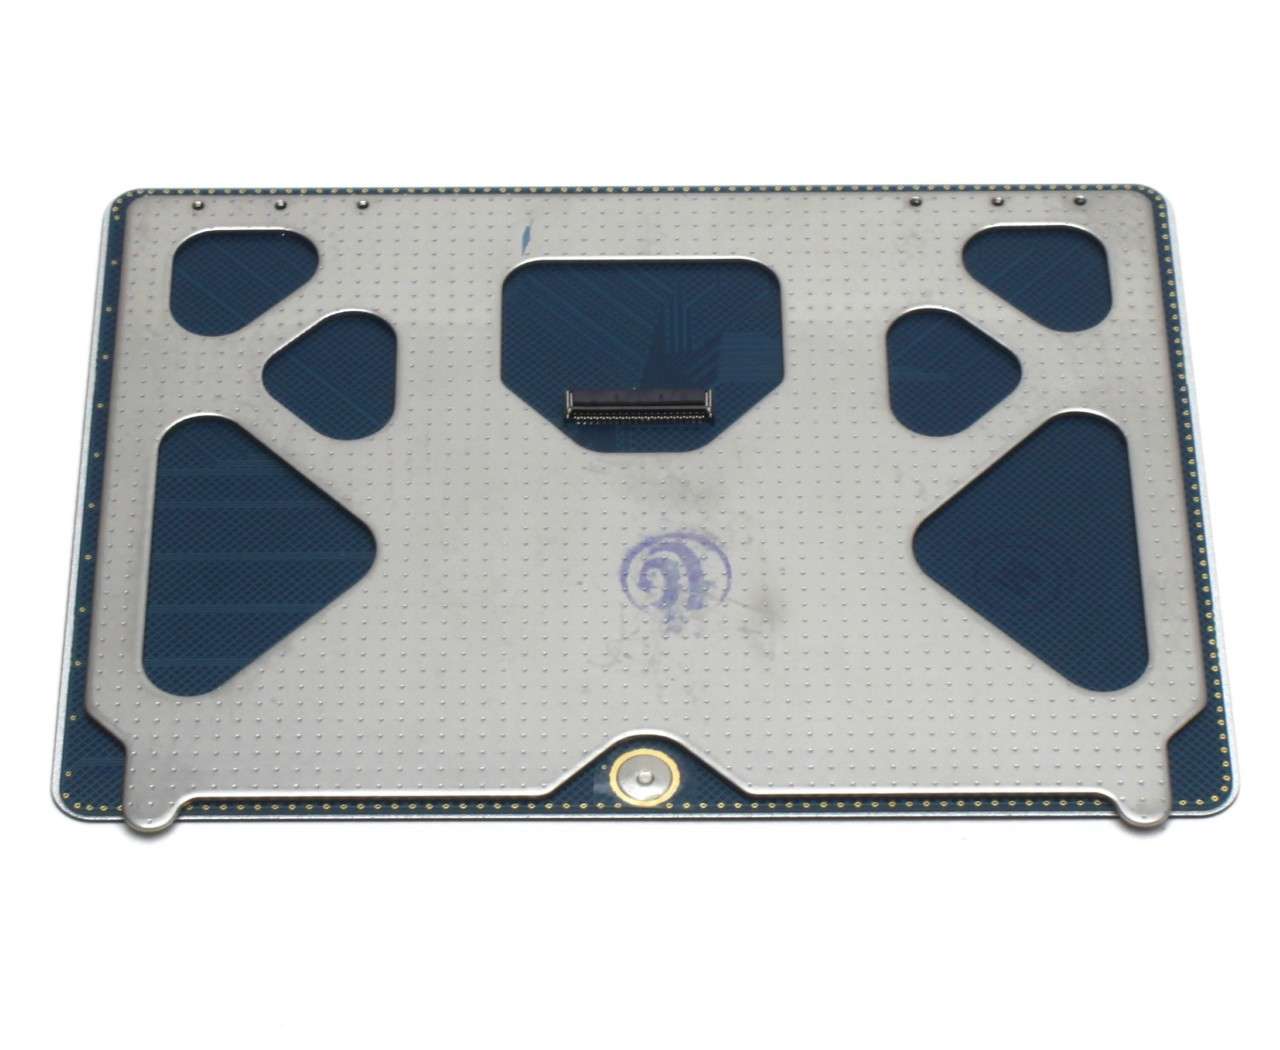 Touchpad Apple Macbook Pro Unibody 13 A1286 Late 2011 Trackpad image0